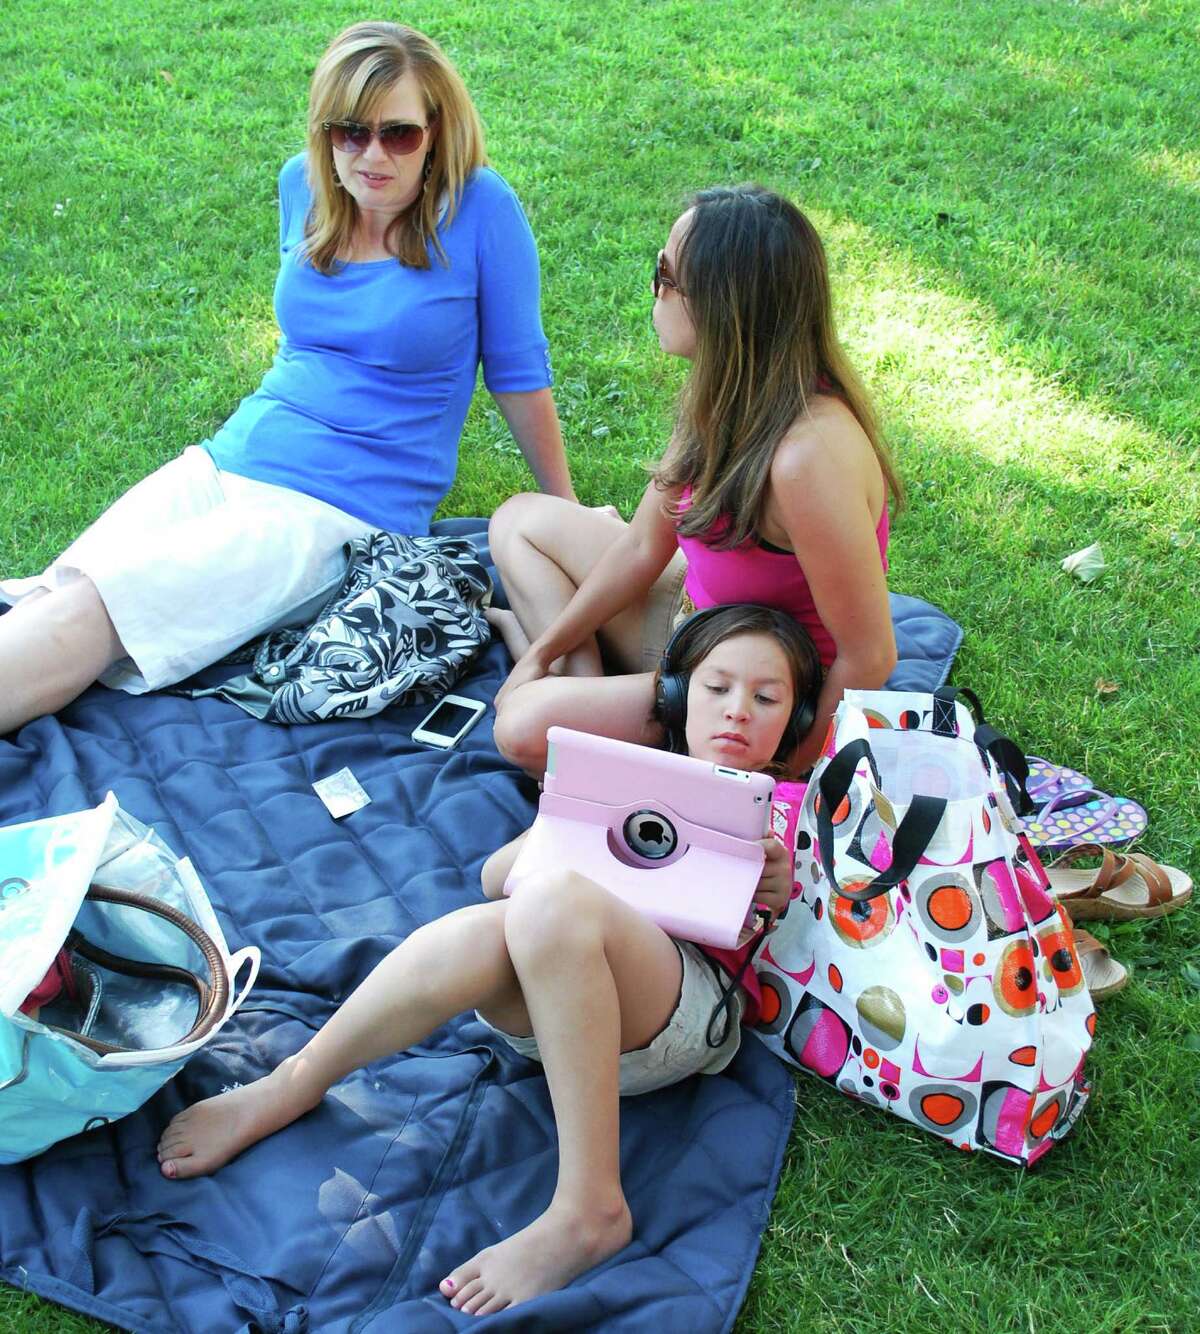 Sue Valentine, left, and Lorraine Plue, members of the WomanâÄôs Club of Greater New Milford, share some down time as LorraineâÄôs daughter, Alexis Plue, 8, indulges in her own pursuit before New MilfordâÄôs Fourth of July festivities kick off on the Village Green July 5, 2014. The Greater New Milford Chamber of Commerce spearheaded the festivities, which capped off with a fireworks display over the Fort Hill area. The Lions Club also sponsored a multi-day carnival at YoungâÄôs Field.